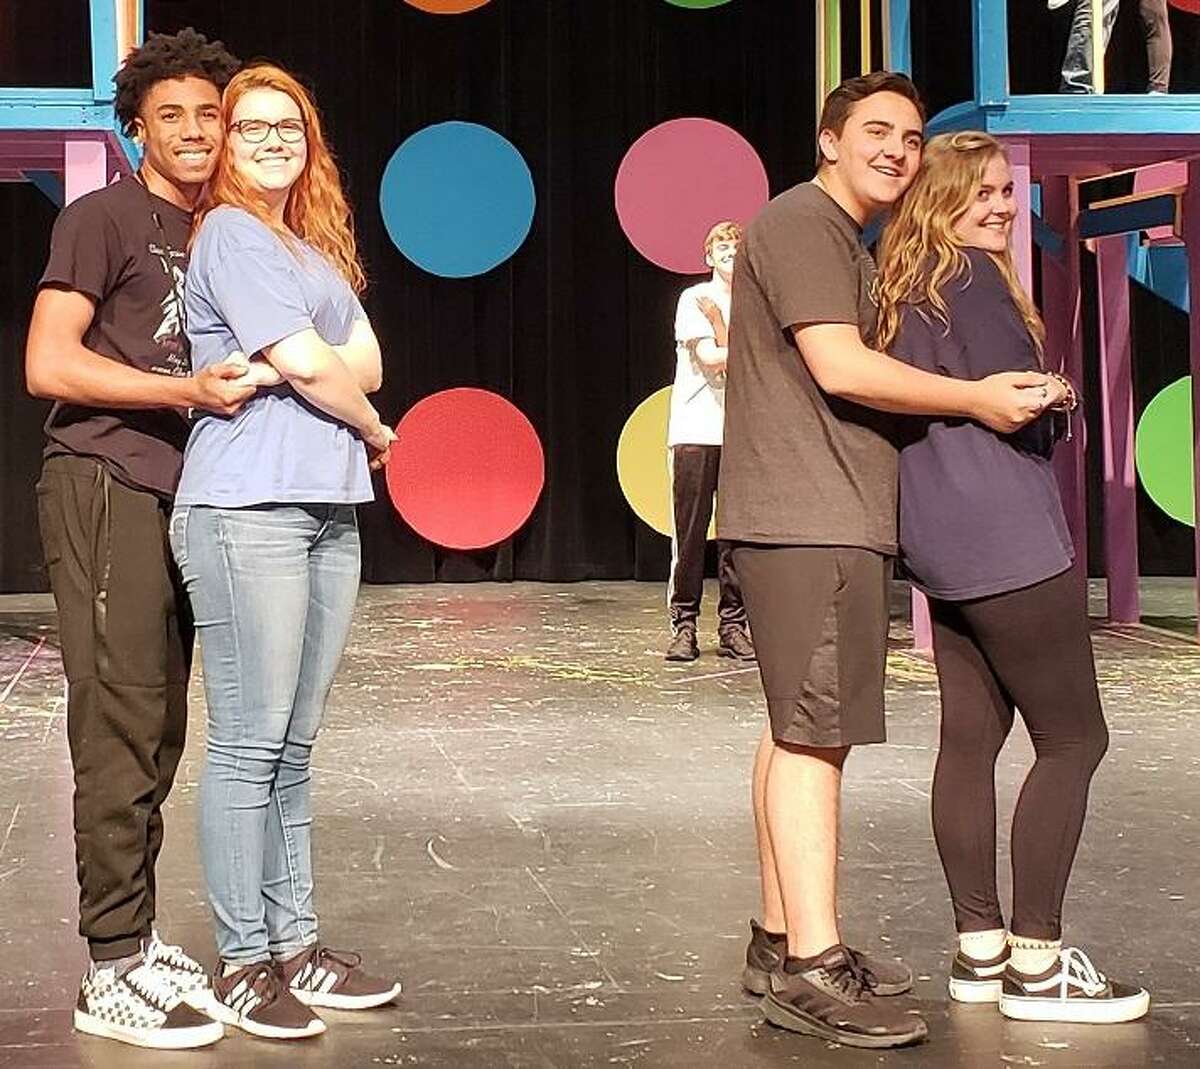 “Hairspray” opens at 7 p.m. Thursday, Jan. 31 at Clear Springs High School Performing Arts Center, 501 Palomino Ln., in League City. Performances will continue at 7 p.m. Feb. 1-2 and 8-9, and 2:30 p.m. Feb. 10.